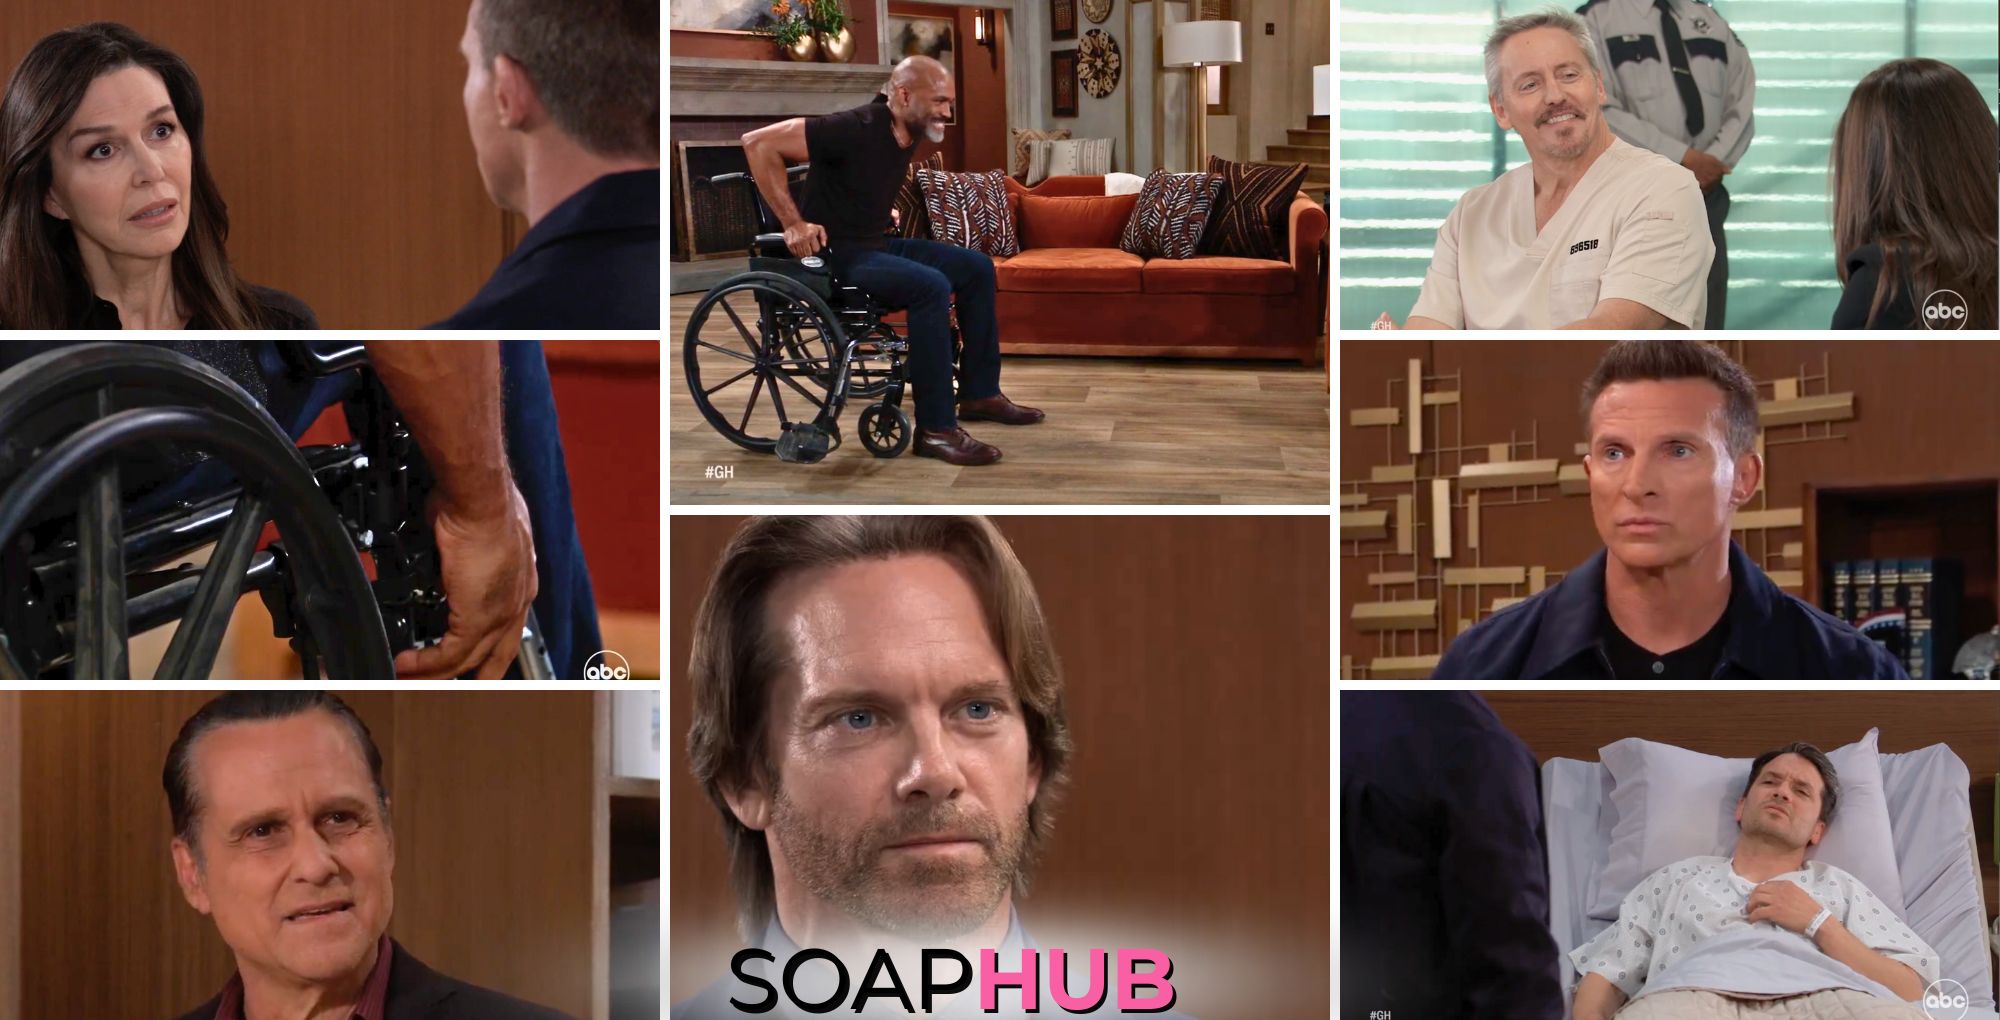 General Hospital spoilers weekly video preview collage for the week of April 1 with the soap hub logo near the bottom of the graphic